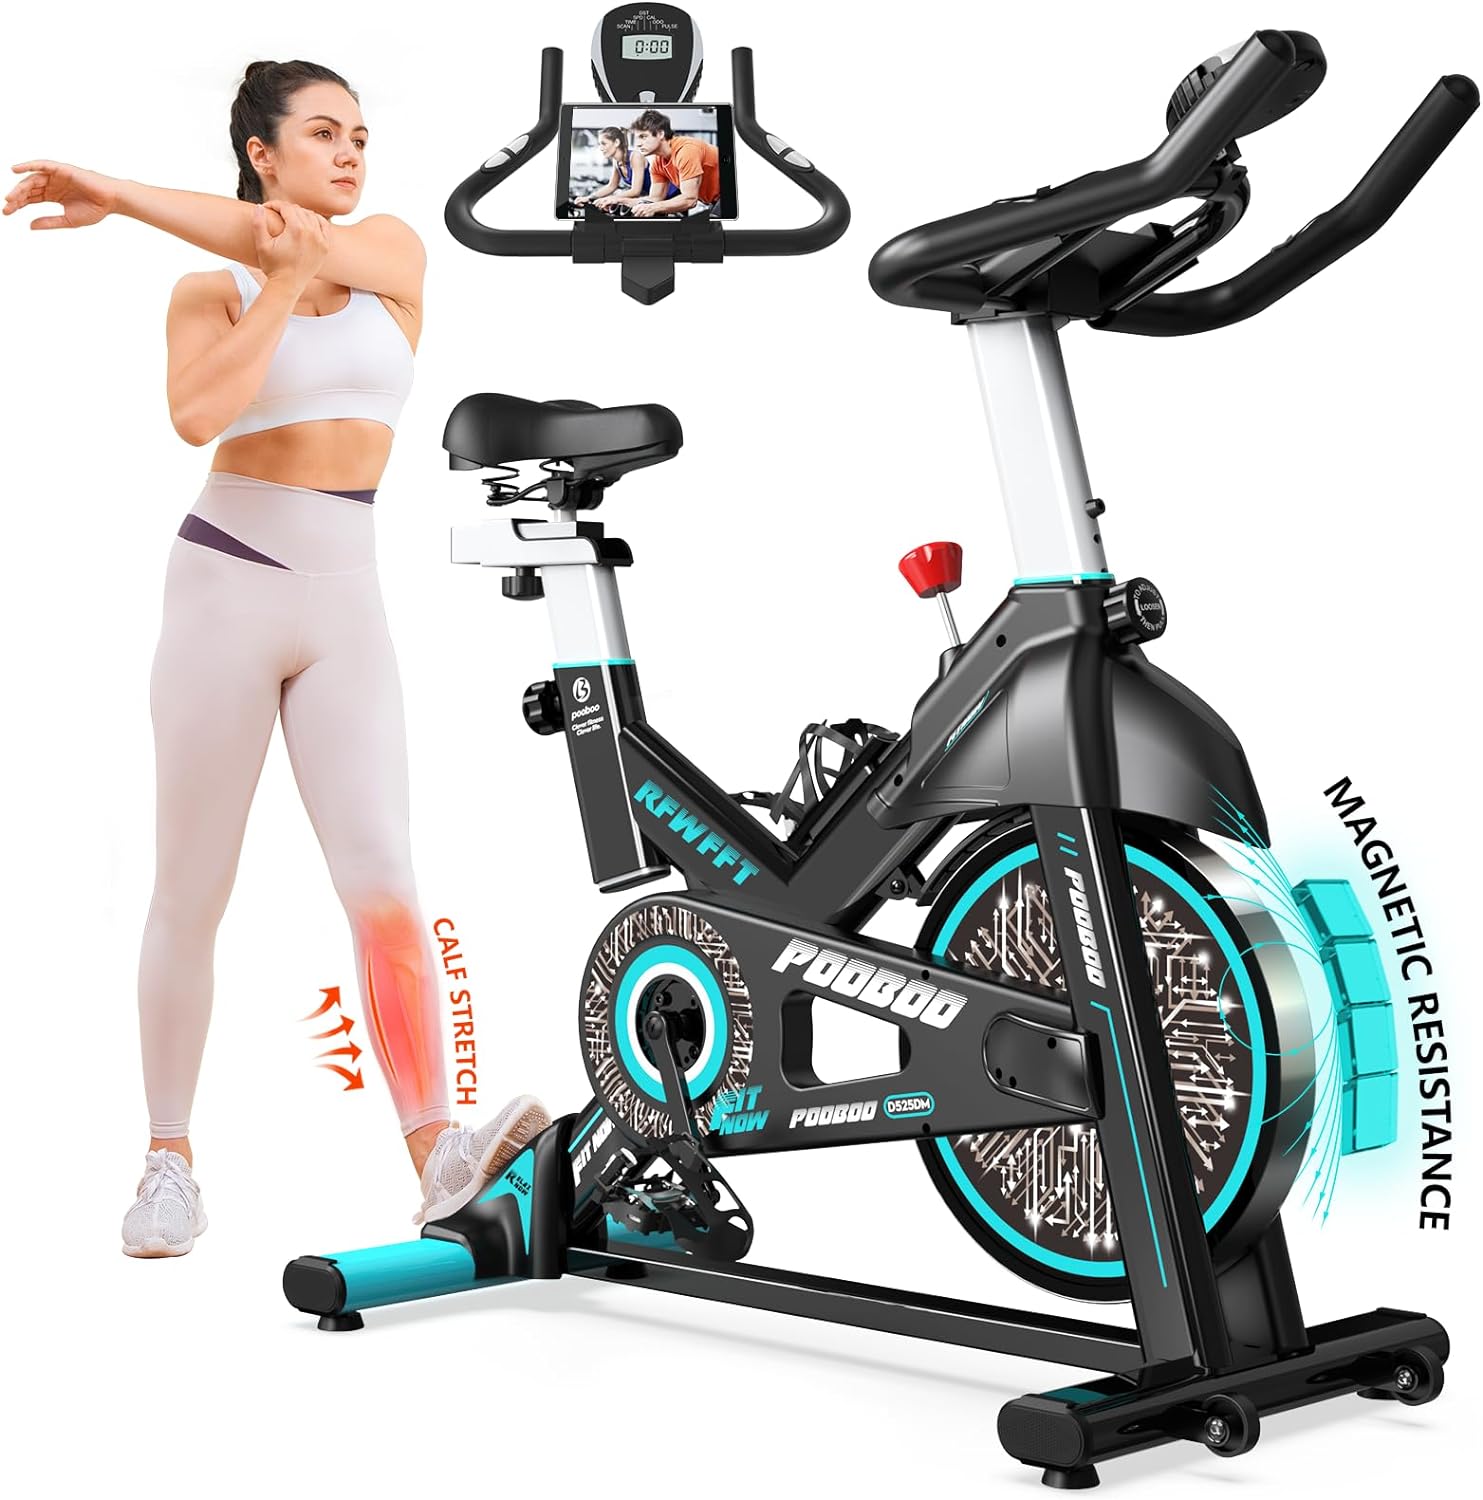 pooboo Exercise Bike, Adjustable Magnetic Resistance Silent Belt Drive, Indoor Cycling Bike for Home Cardio Gym, Fitness Stationary Bike Machine with 350lbs/300lbs Weight Capacity, Monitor with Pulse  Ipad Mount Upgraded Version Seat